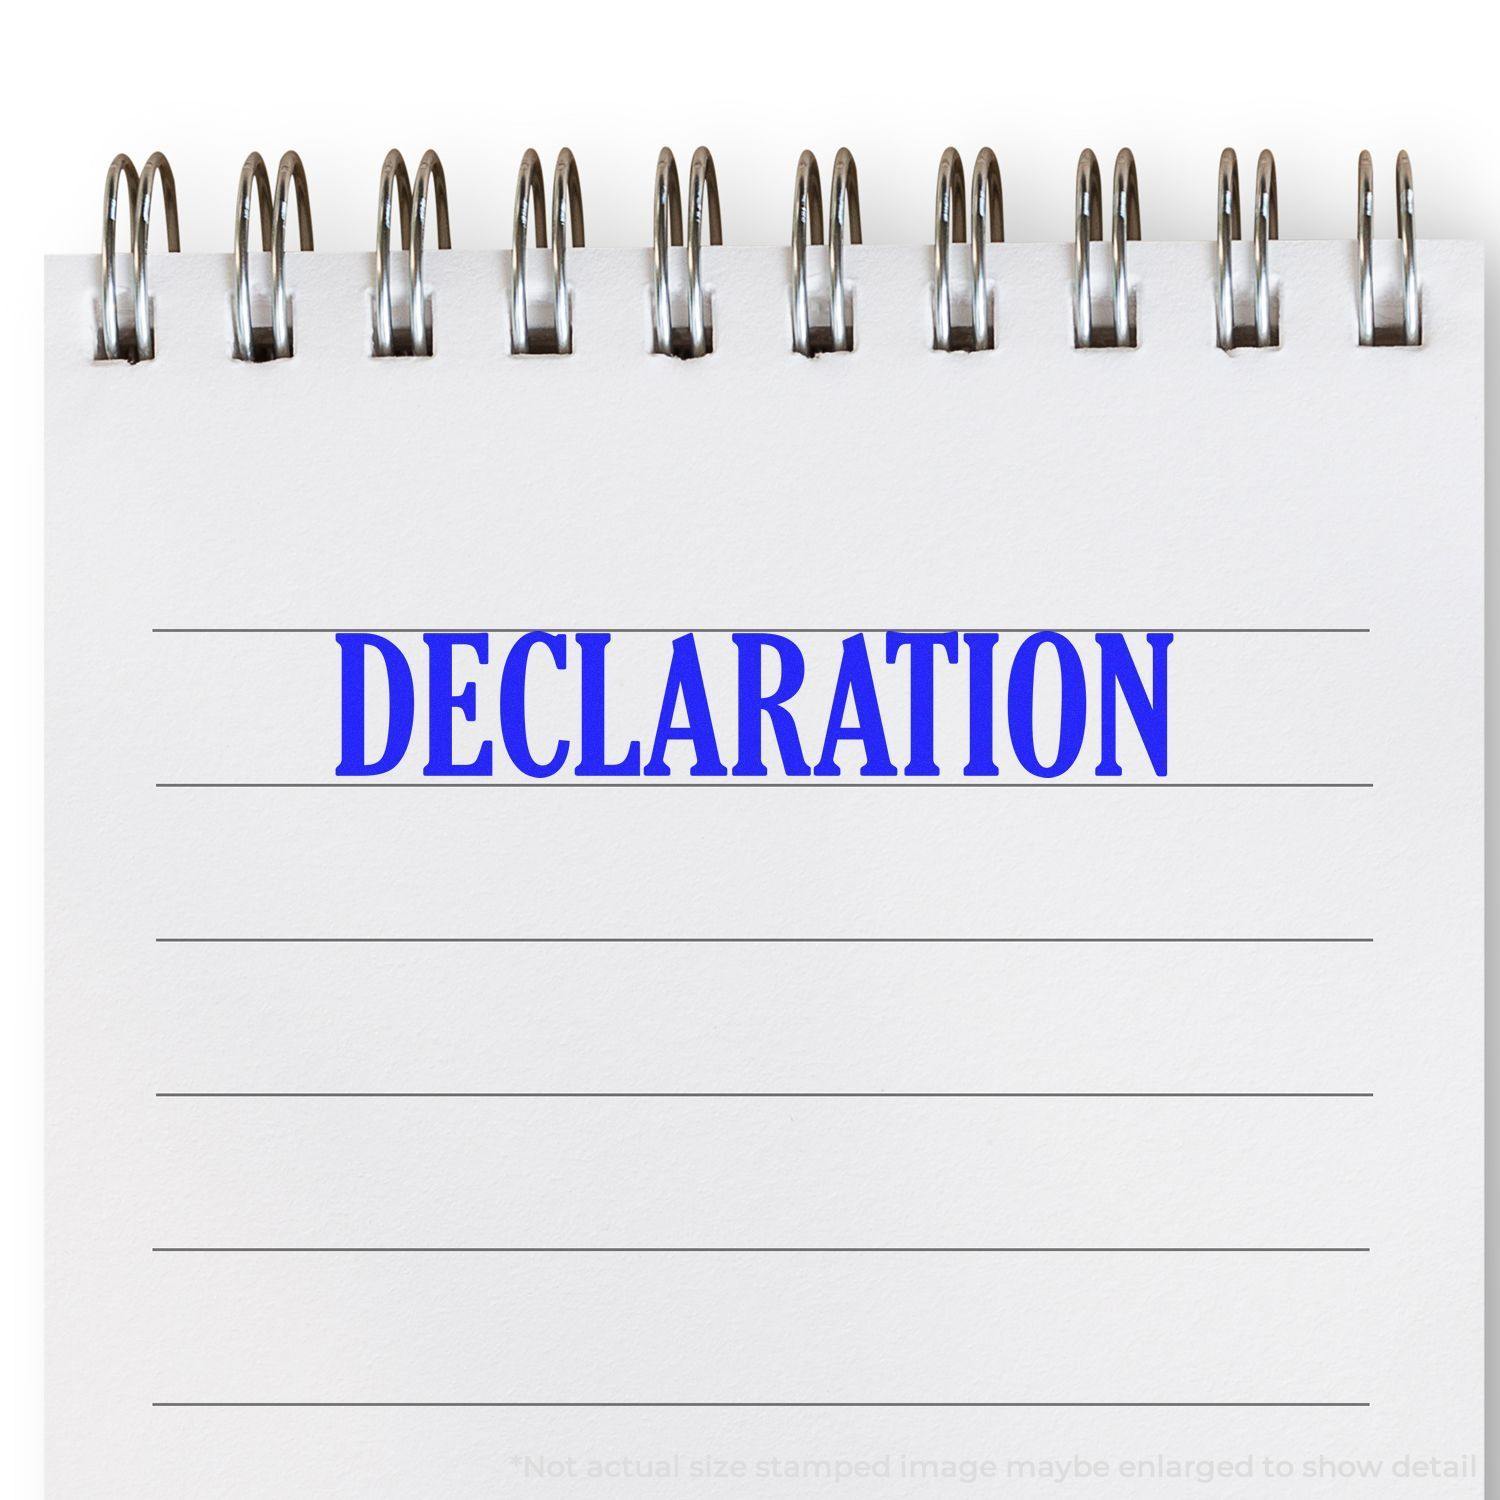 A stock office rubber stamp with a stamped image showing how the text "DECLARATION" is displayed after stamping.